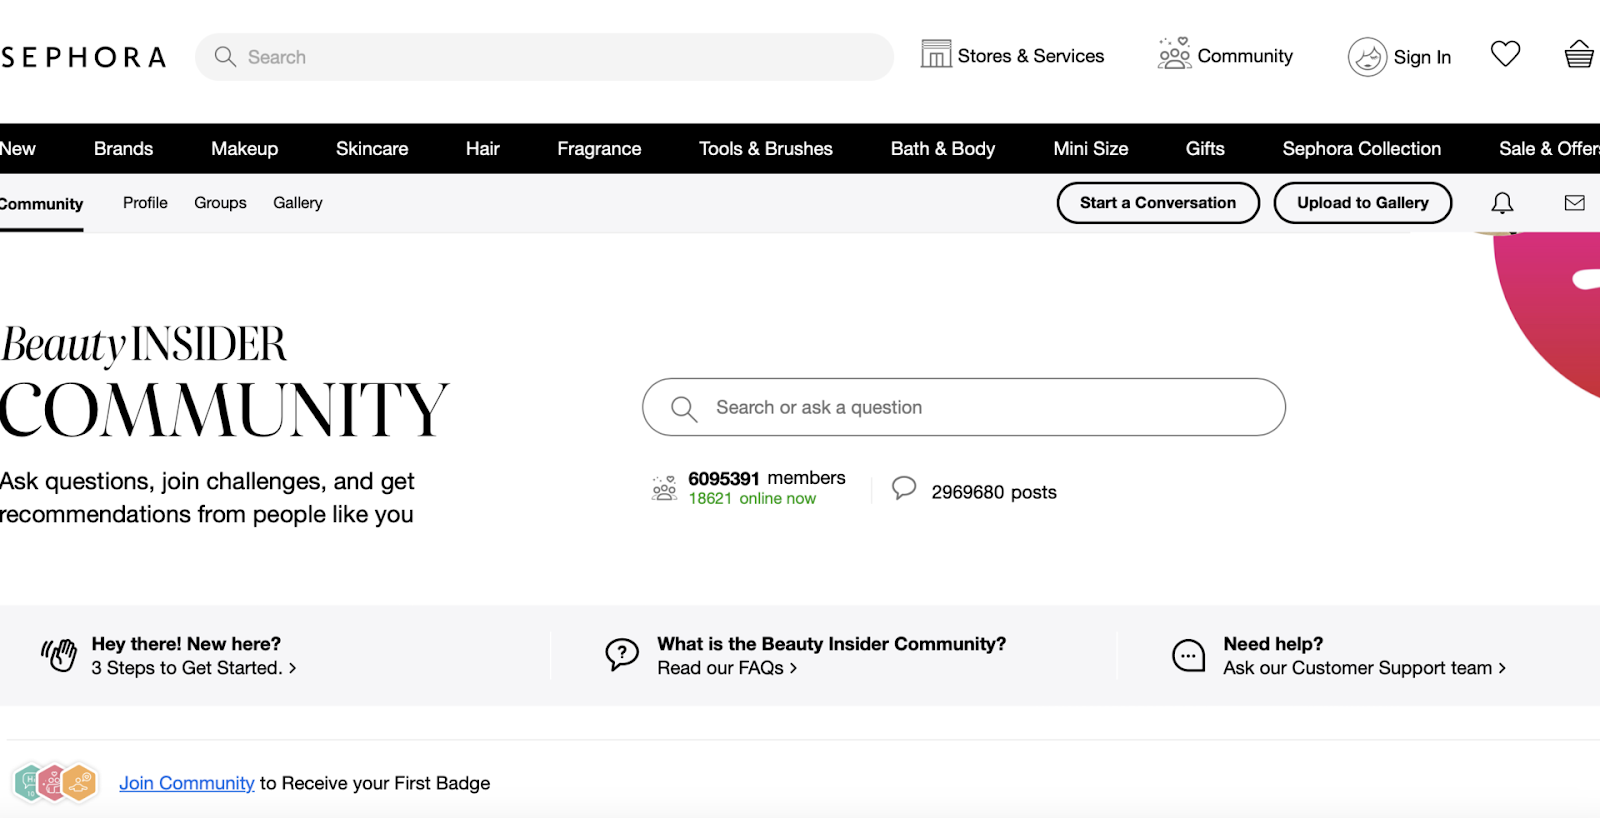 Sephora's website includes the Beauty Insider community as a part of the user-generated blog. 